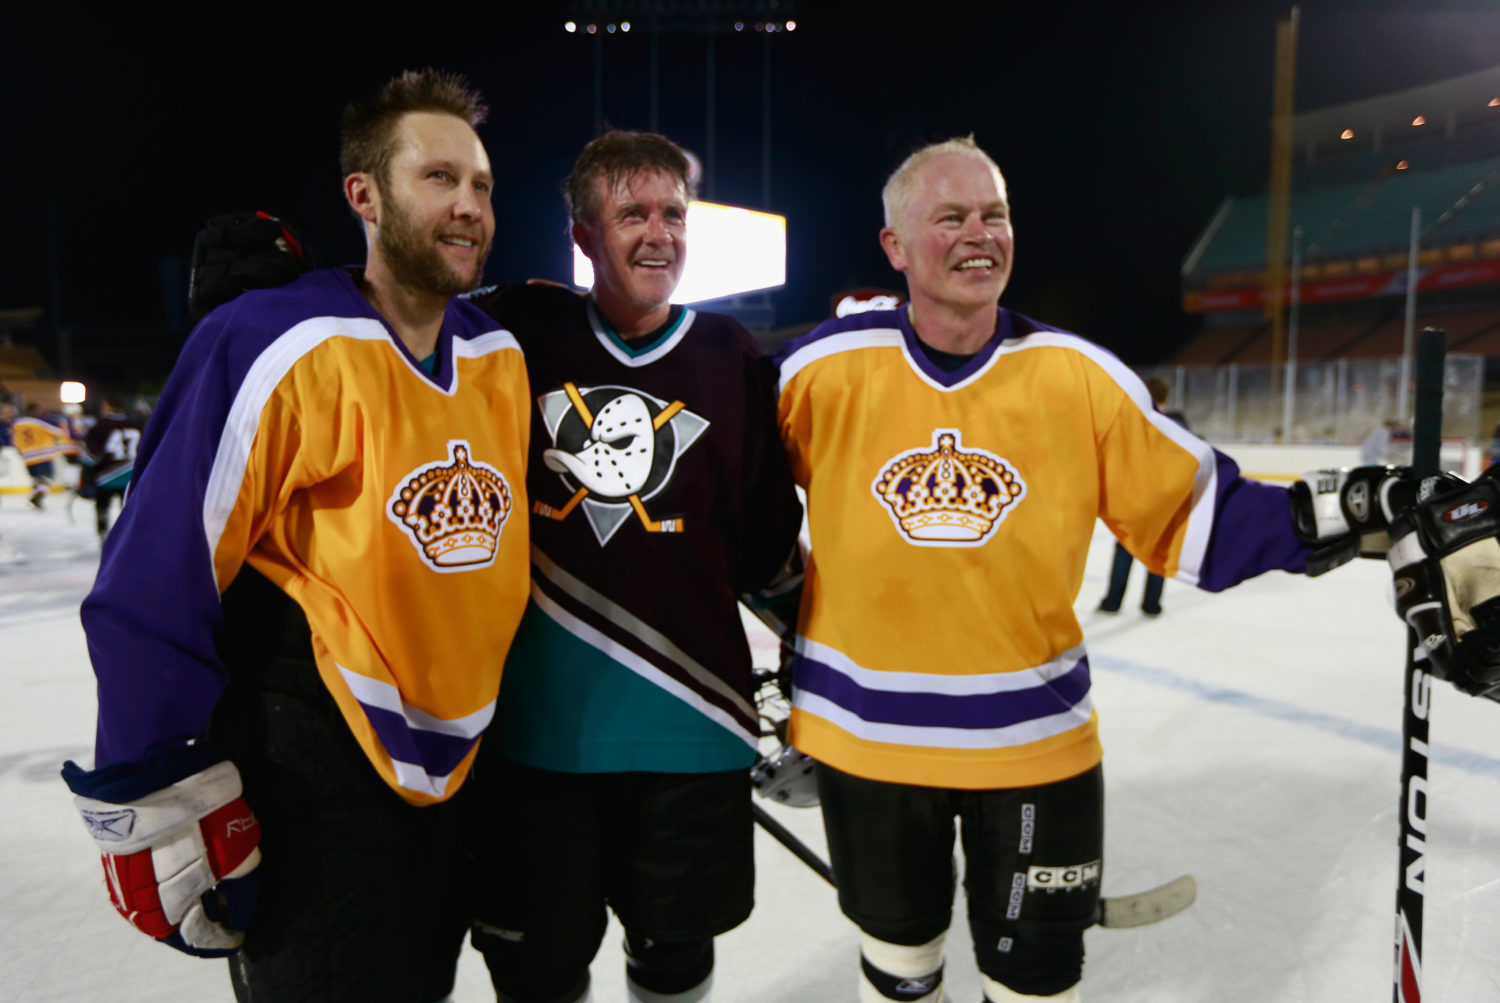 (Jeff Vinnick/NHLI via Getty Images; pay the Ducks jersey no mind - except for team alumni, all participants in the celebrity game were simply assigned either a Kings or Ducks jersey)